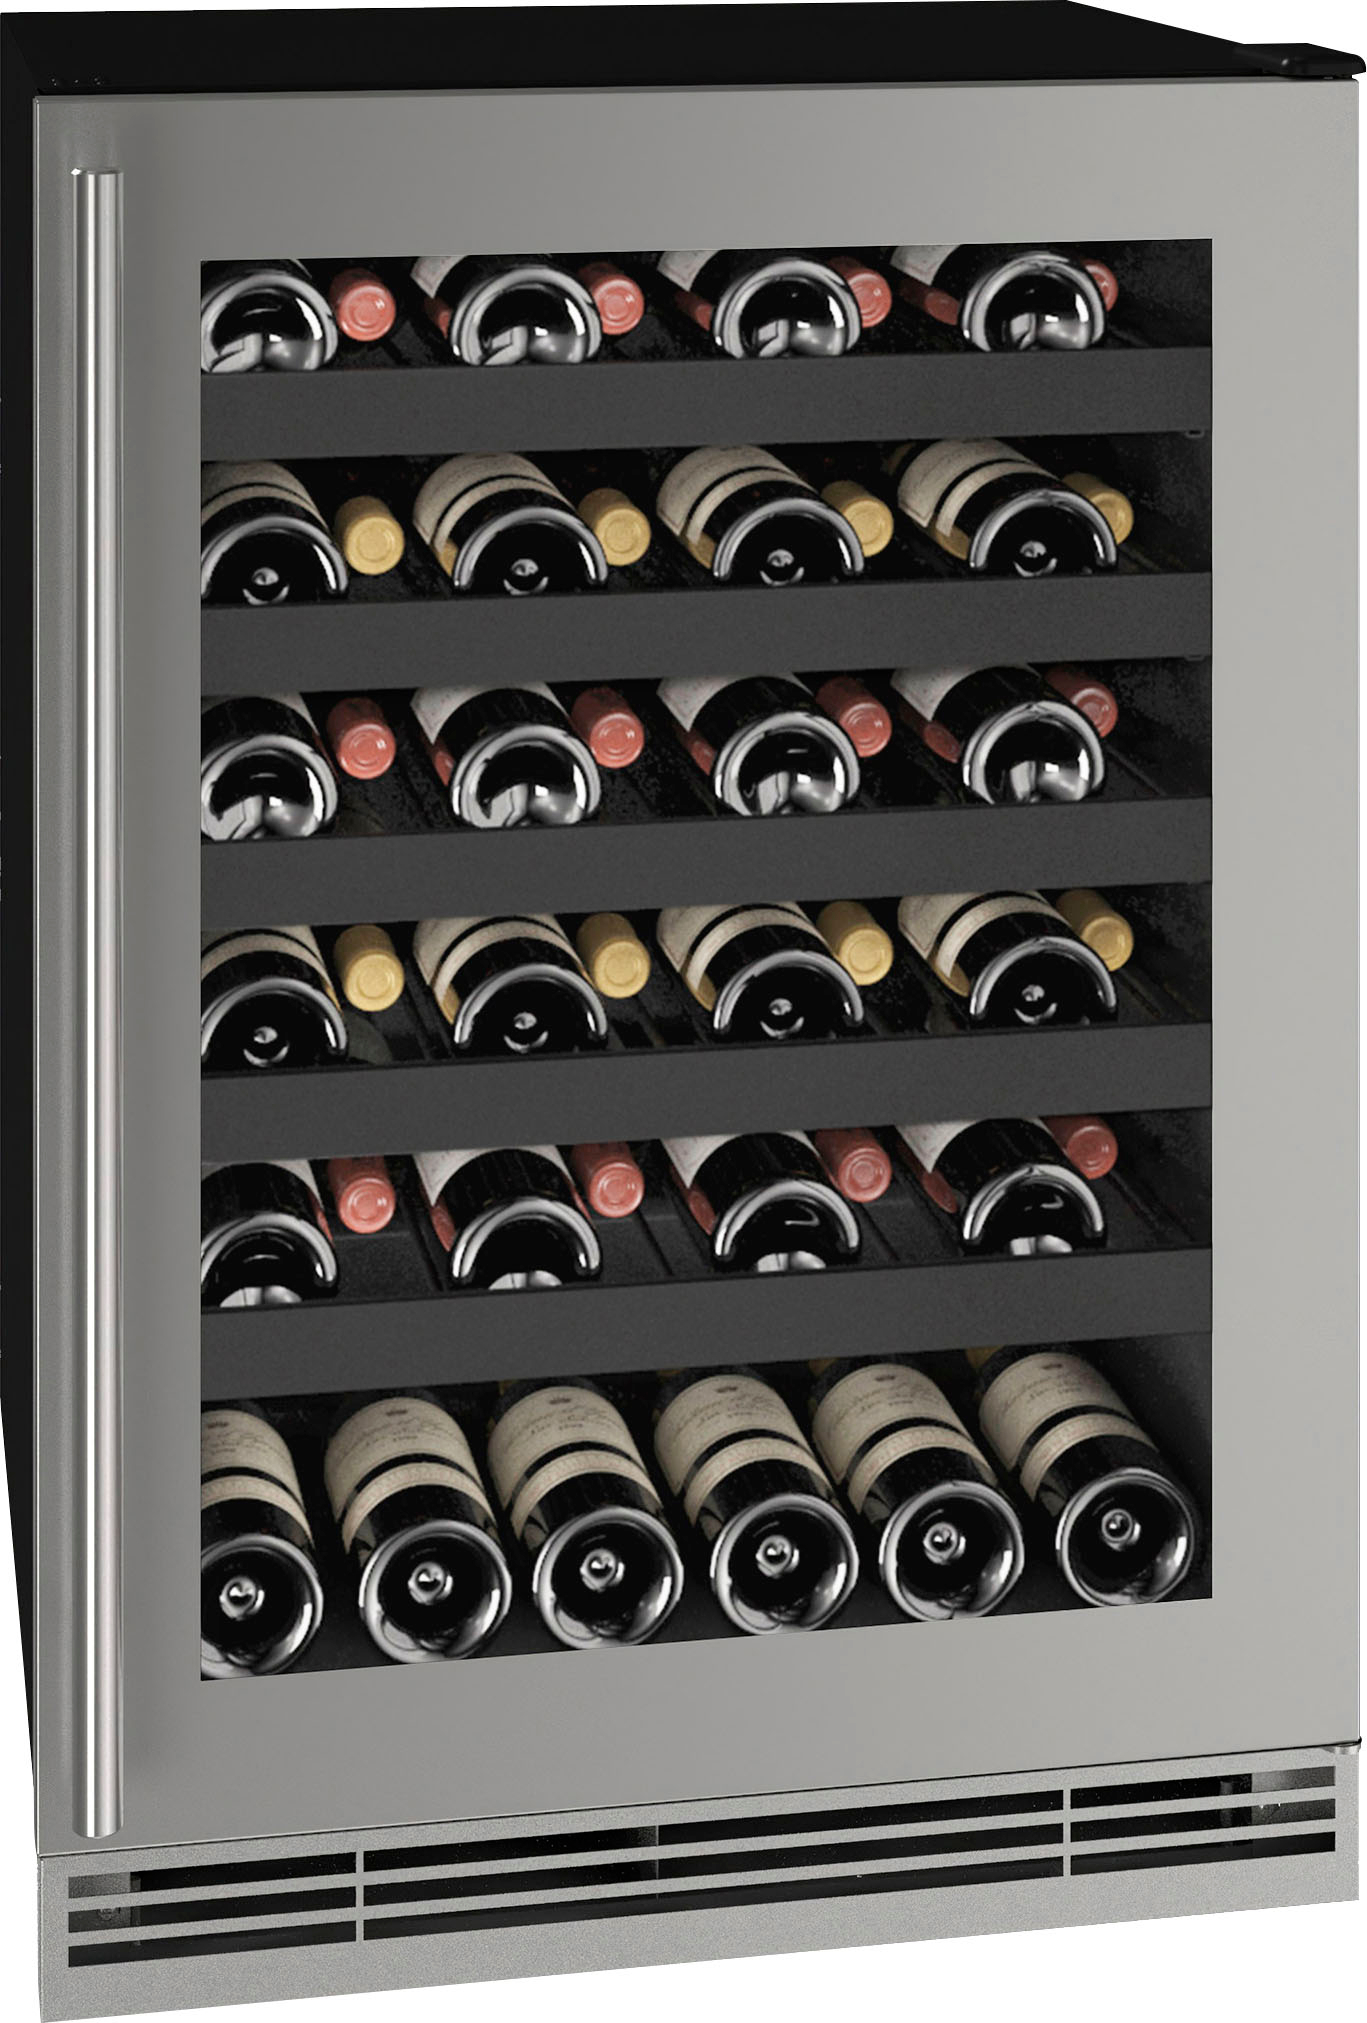 Angle View: U-Line - 1 Class 24-bottle Wine Refrigerator with Convection cooling system - Stainless steel